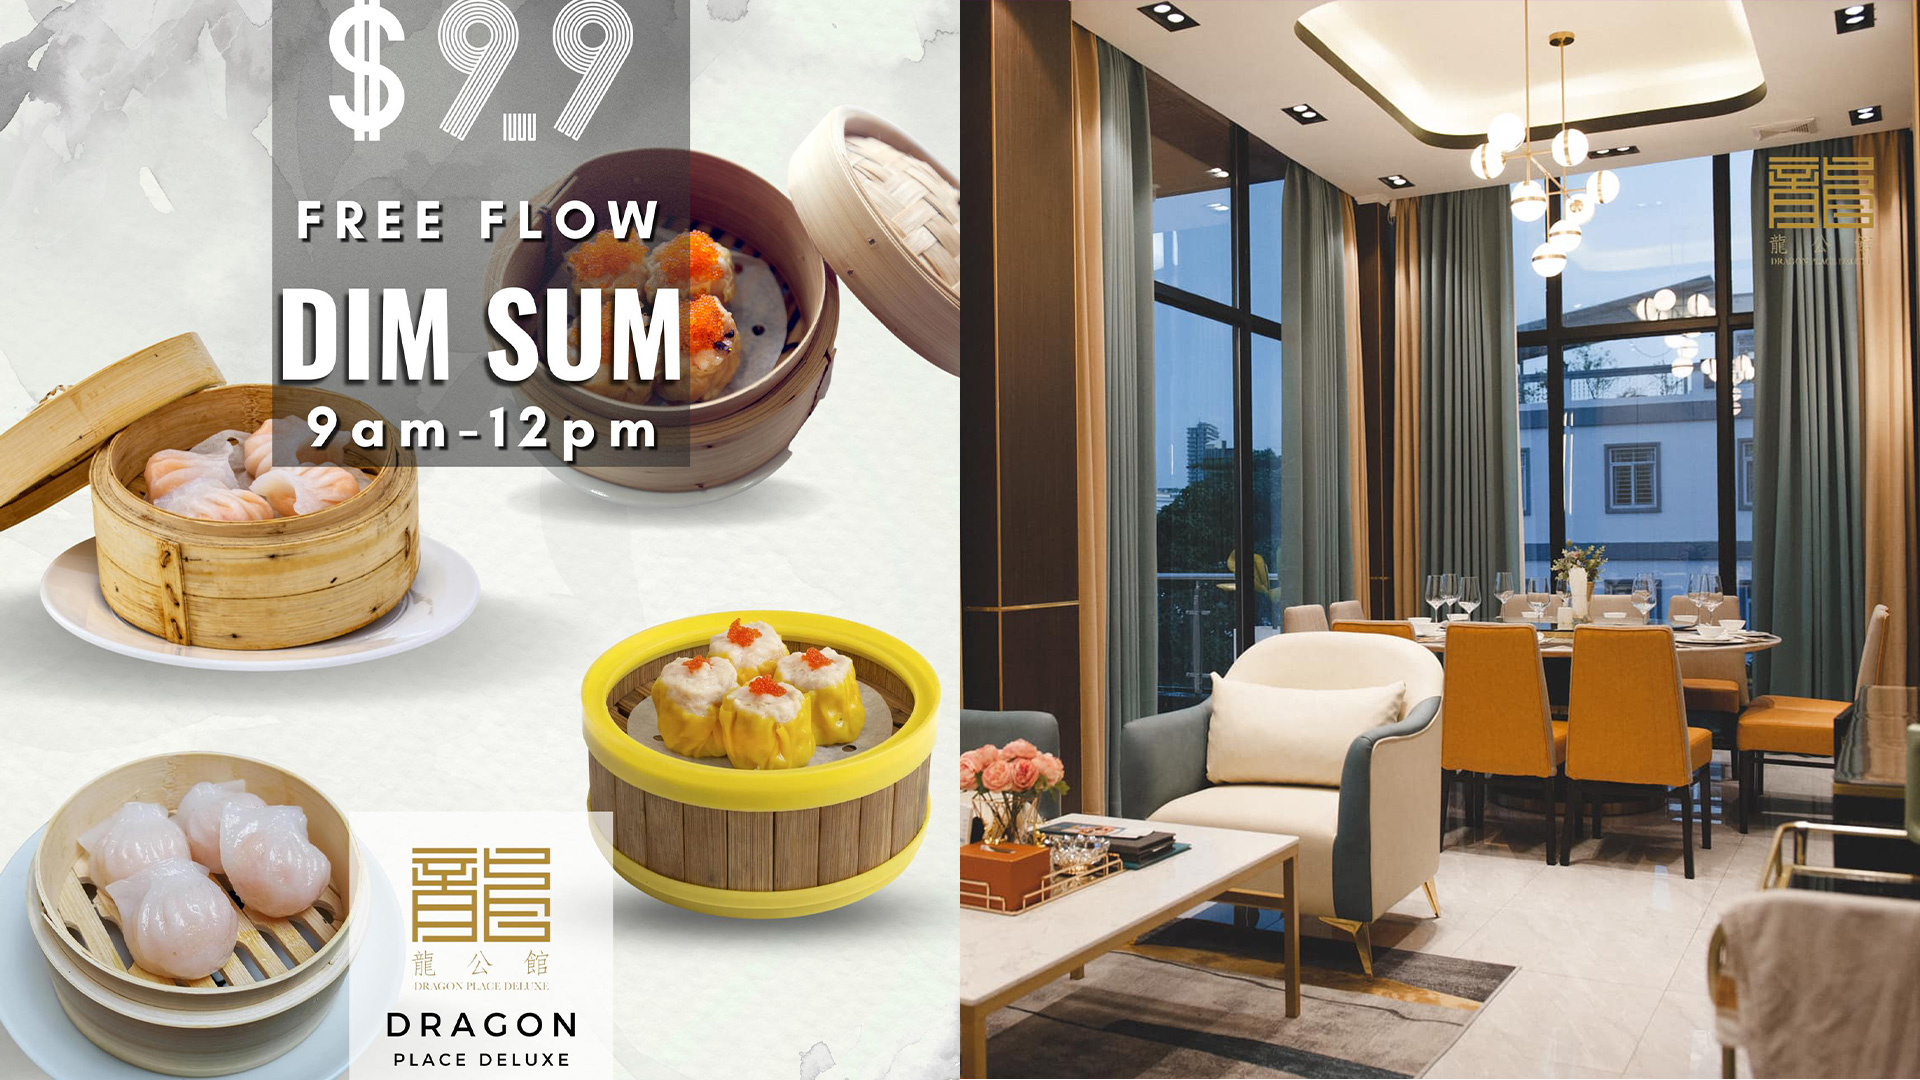 For only 9.9$, you can enjoy a free-flow Dim Sum at Dragon Place Deluxe!